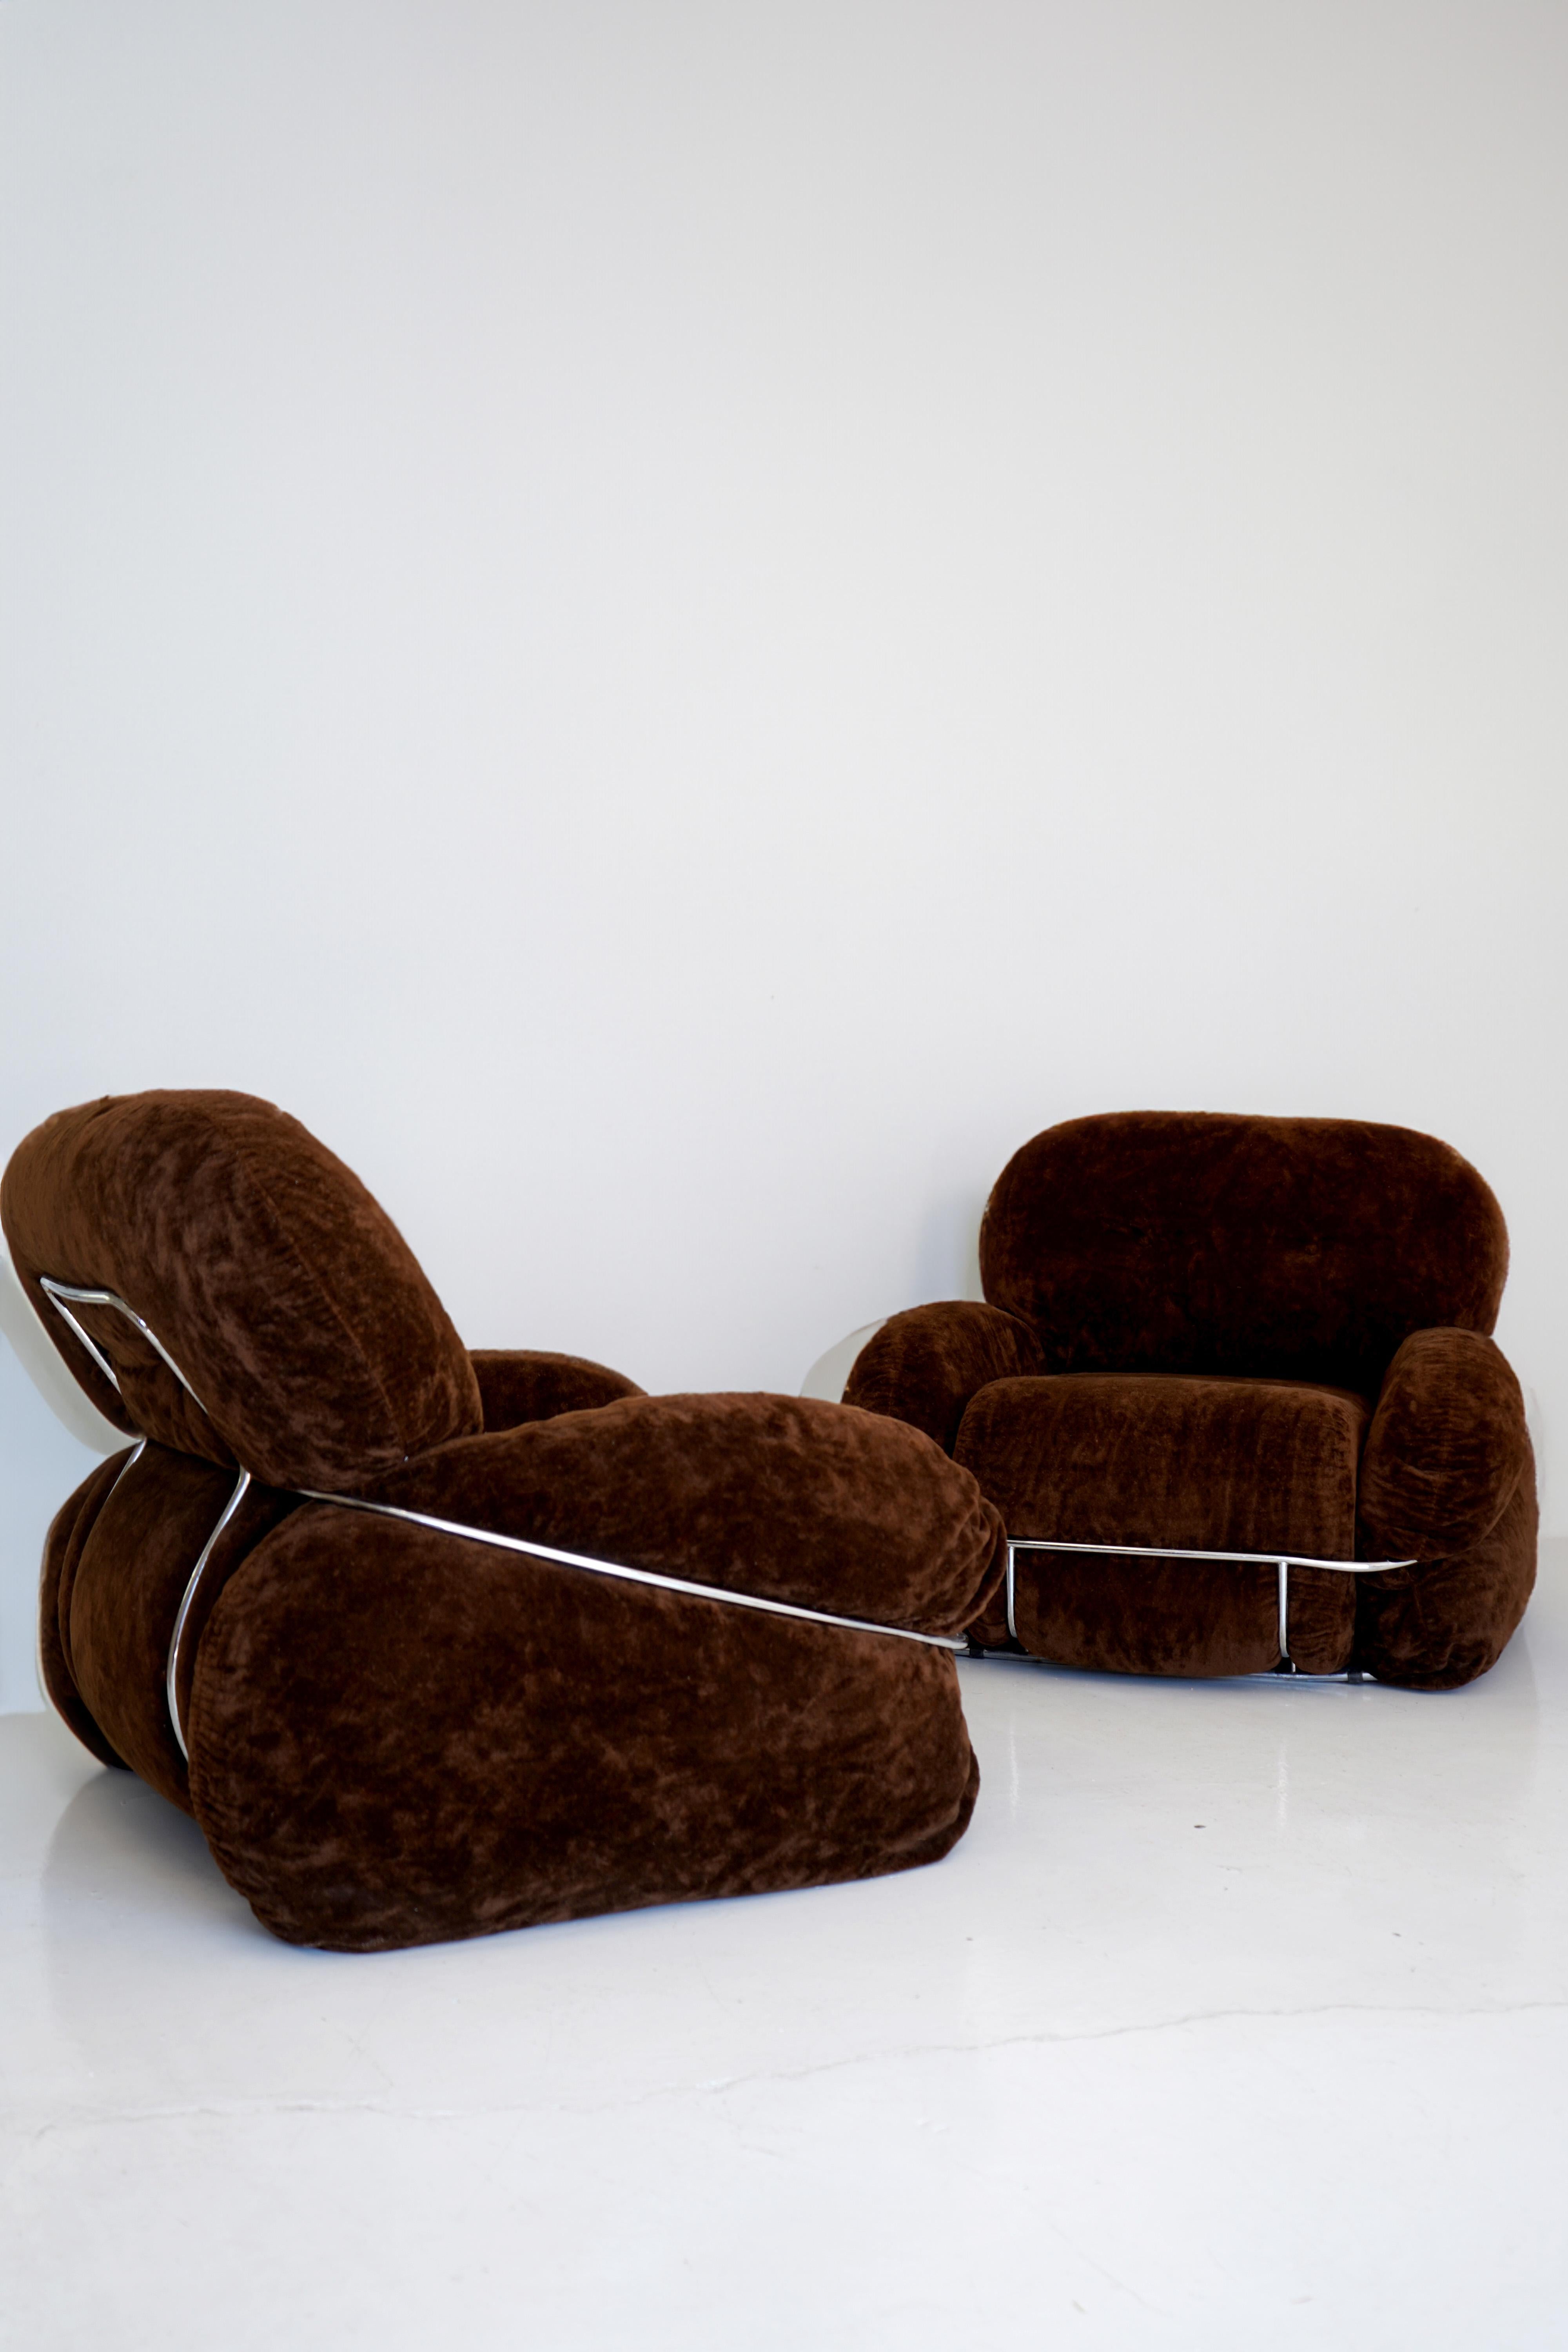 Pair of Okay lounge chairs by Adriano Piazzesi. Exaggerated curves wrapping in and out of a looping chrome frame. Original chocolate brown velvet remains in good vintage condition with no tears or stains. Priced as a pair.